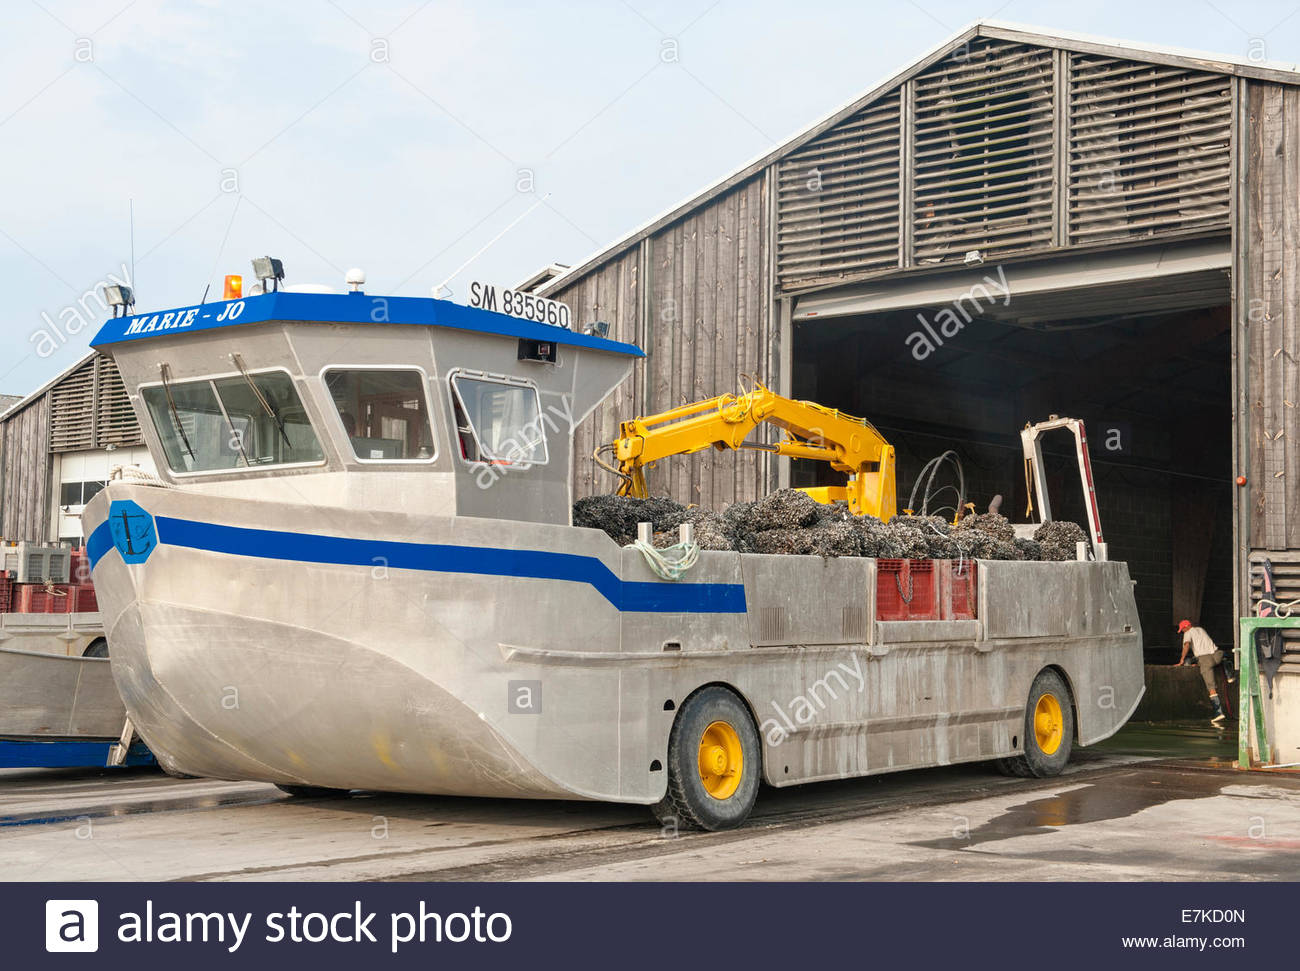 amphibious-boat-used-for-harvesting-mussels-at-le-vivier-sur-mer-in-E7KD0N.jpg